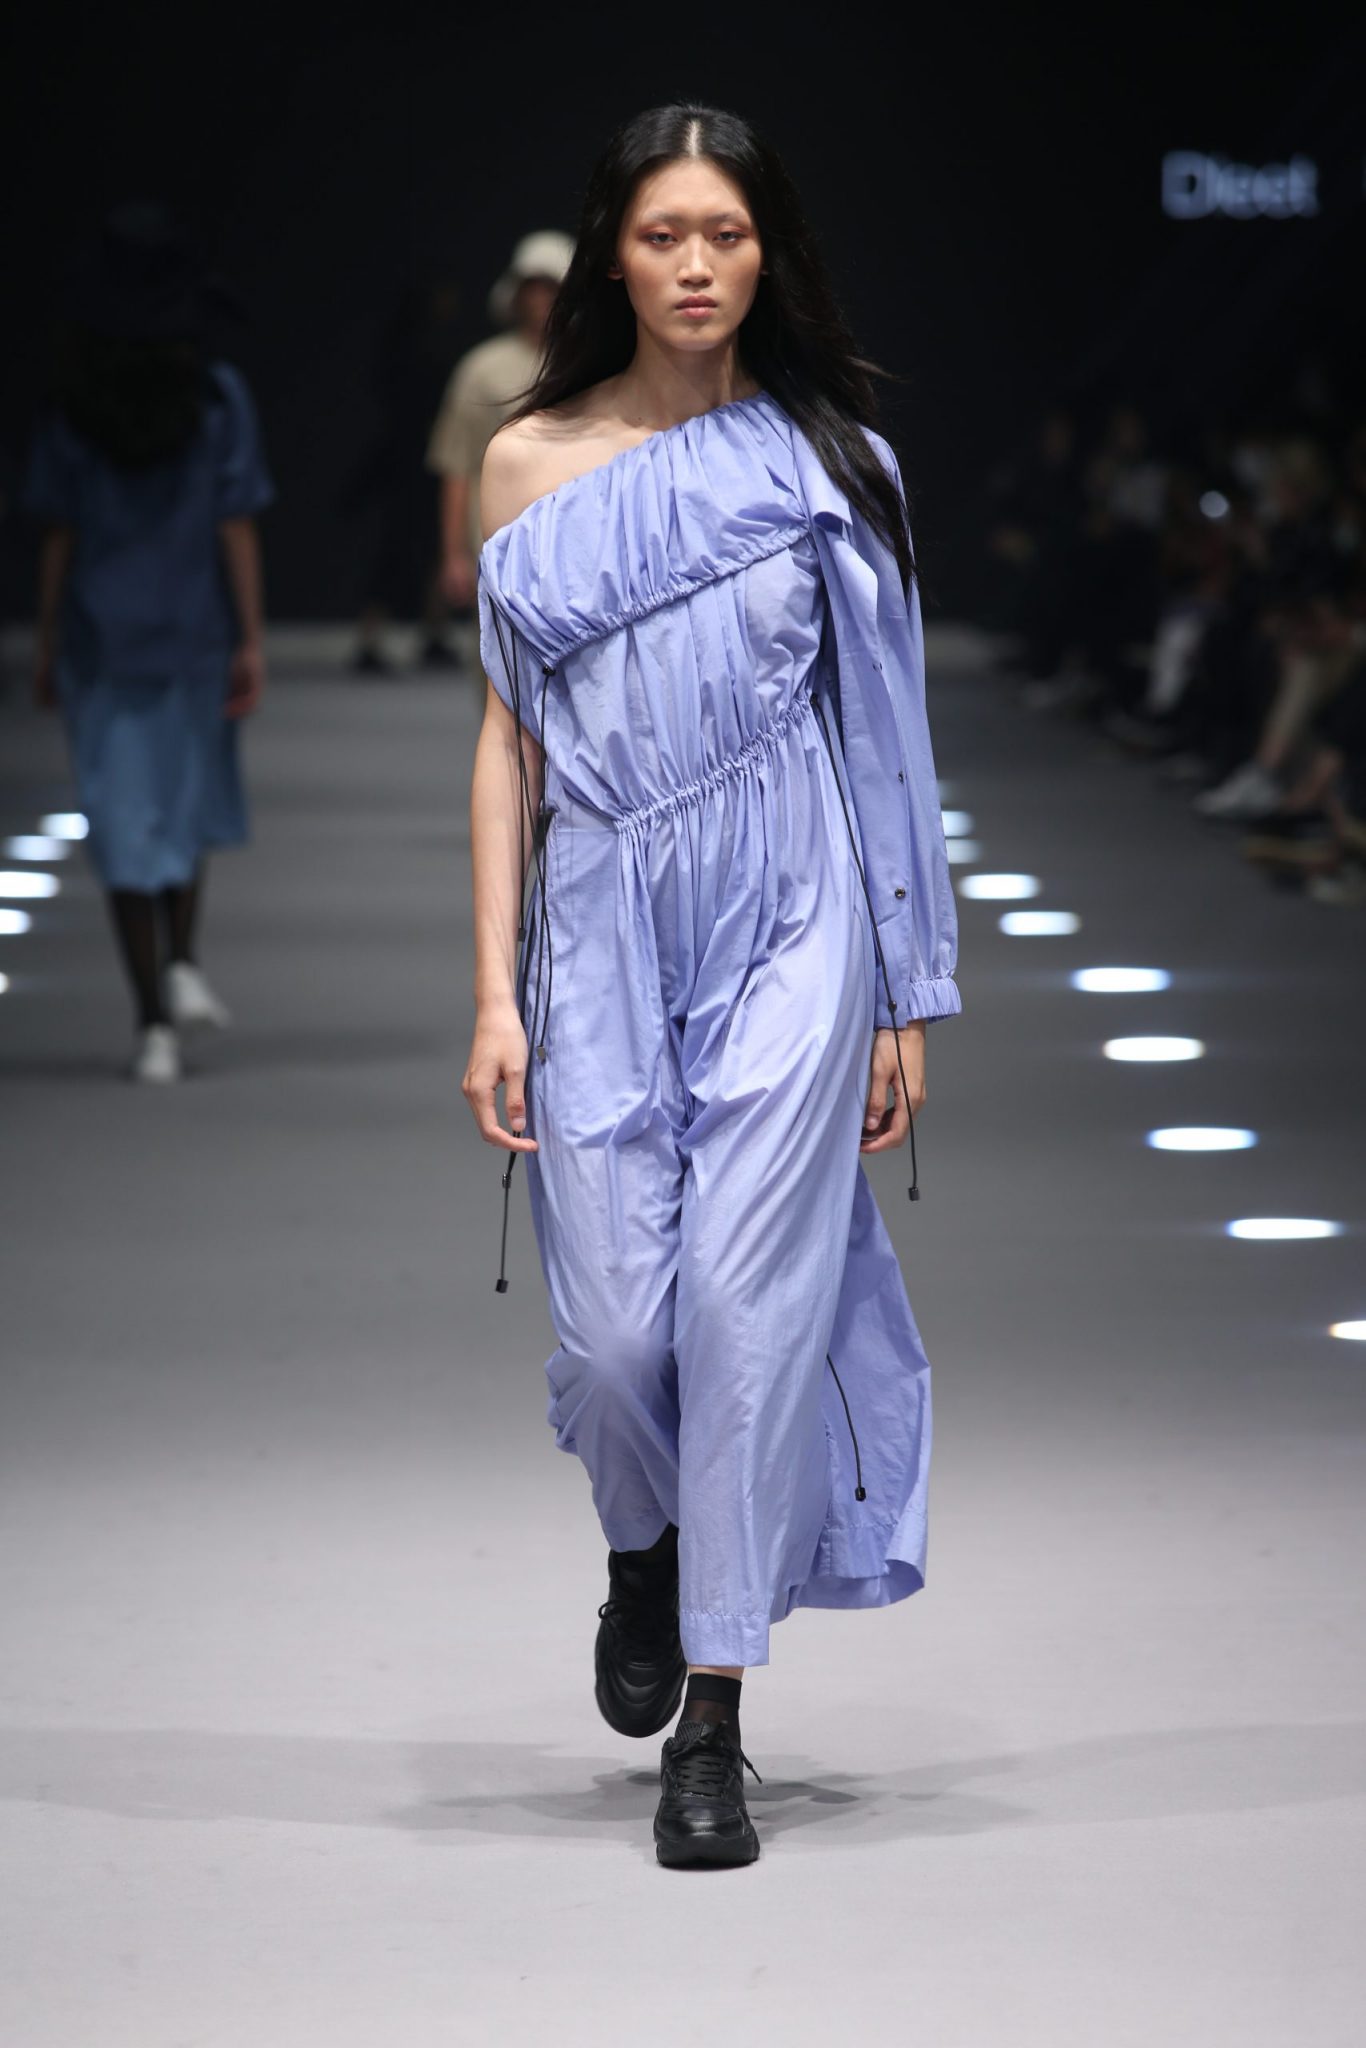 7 Buzzed-about Designers Showing At Taipei Fashion Week - Daily Front Row